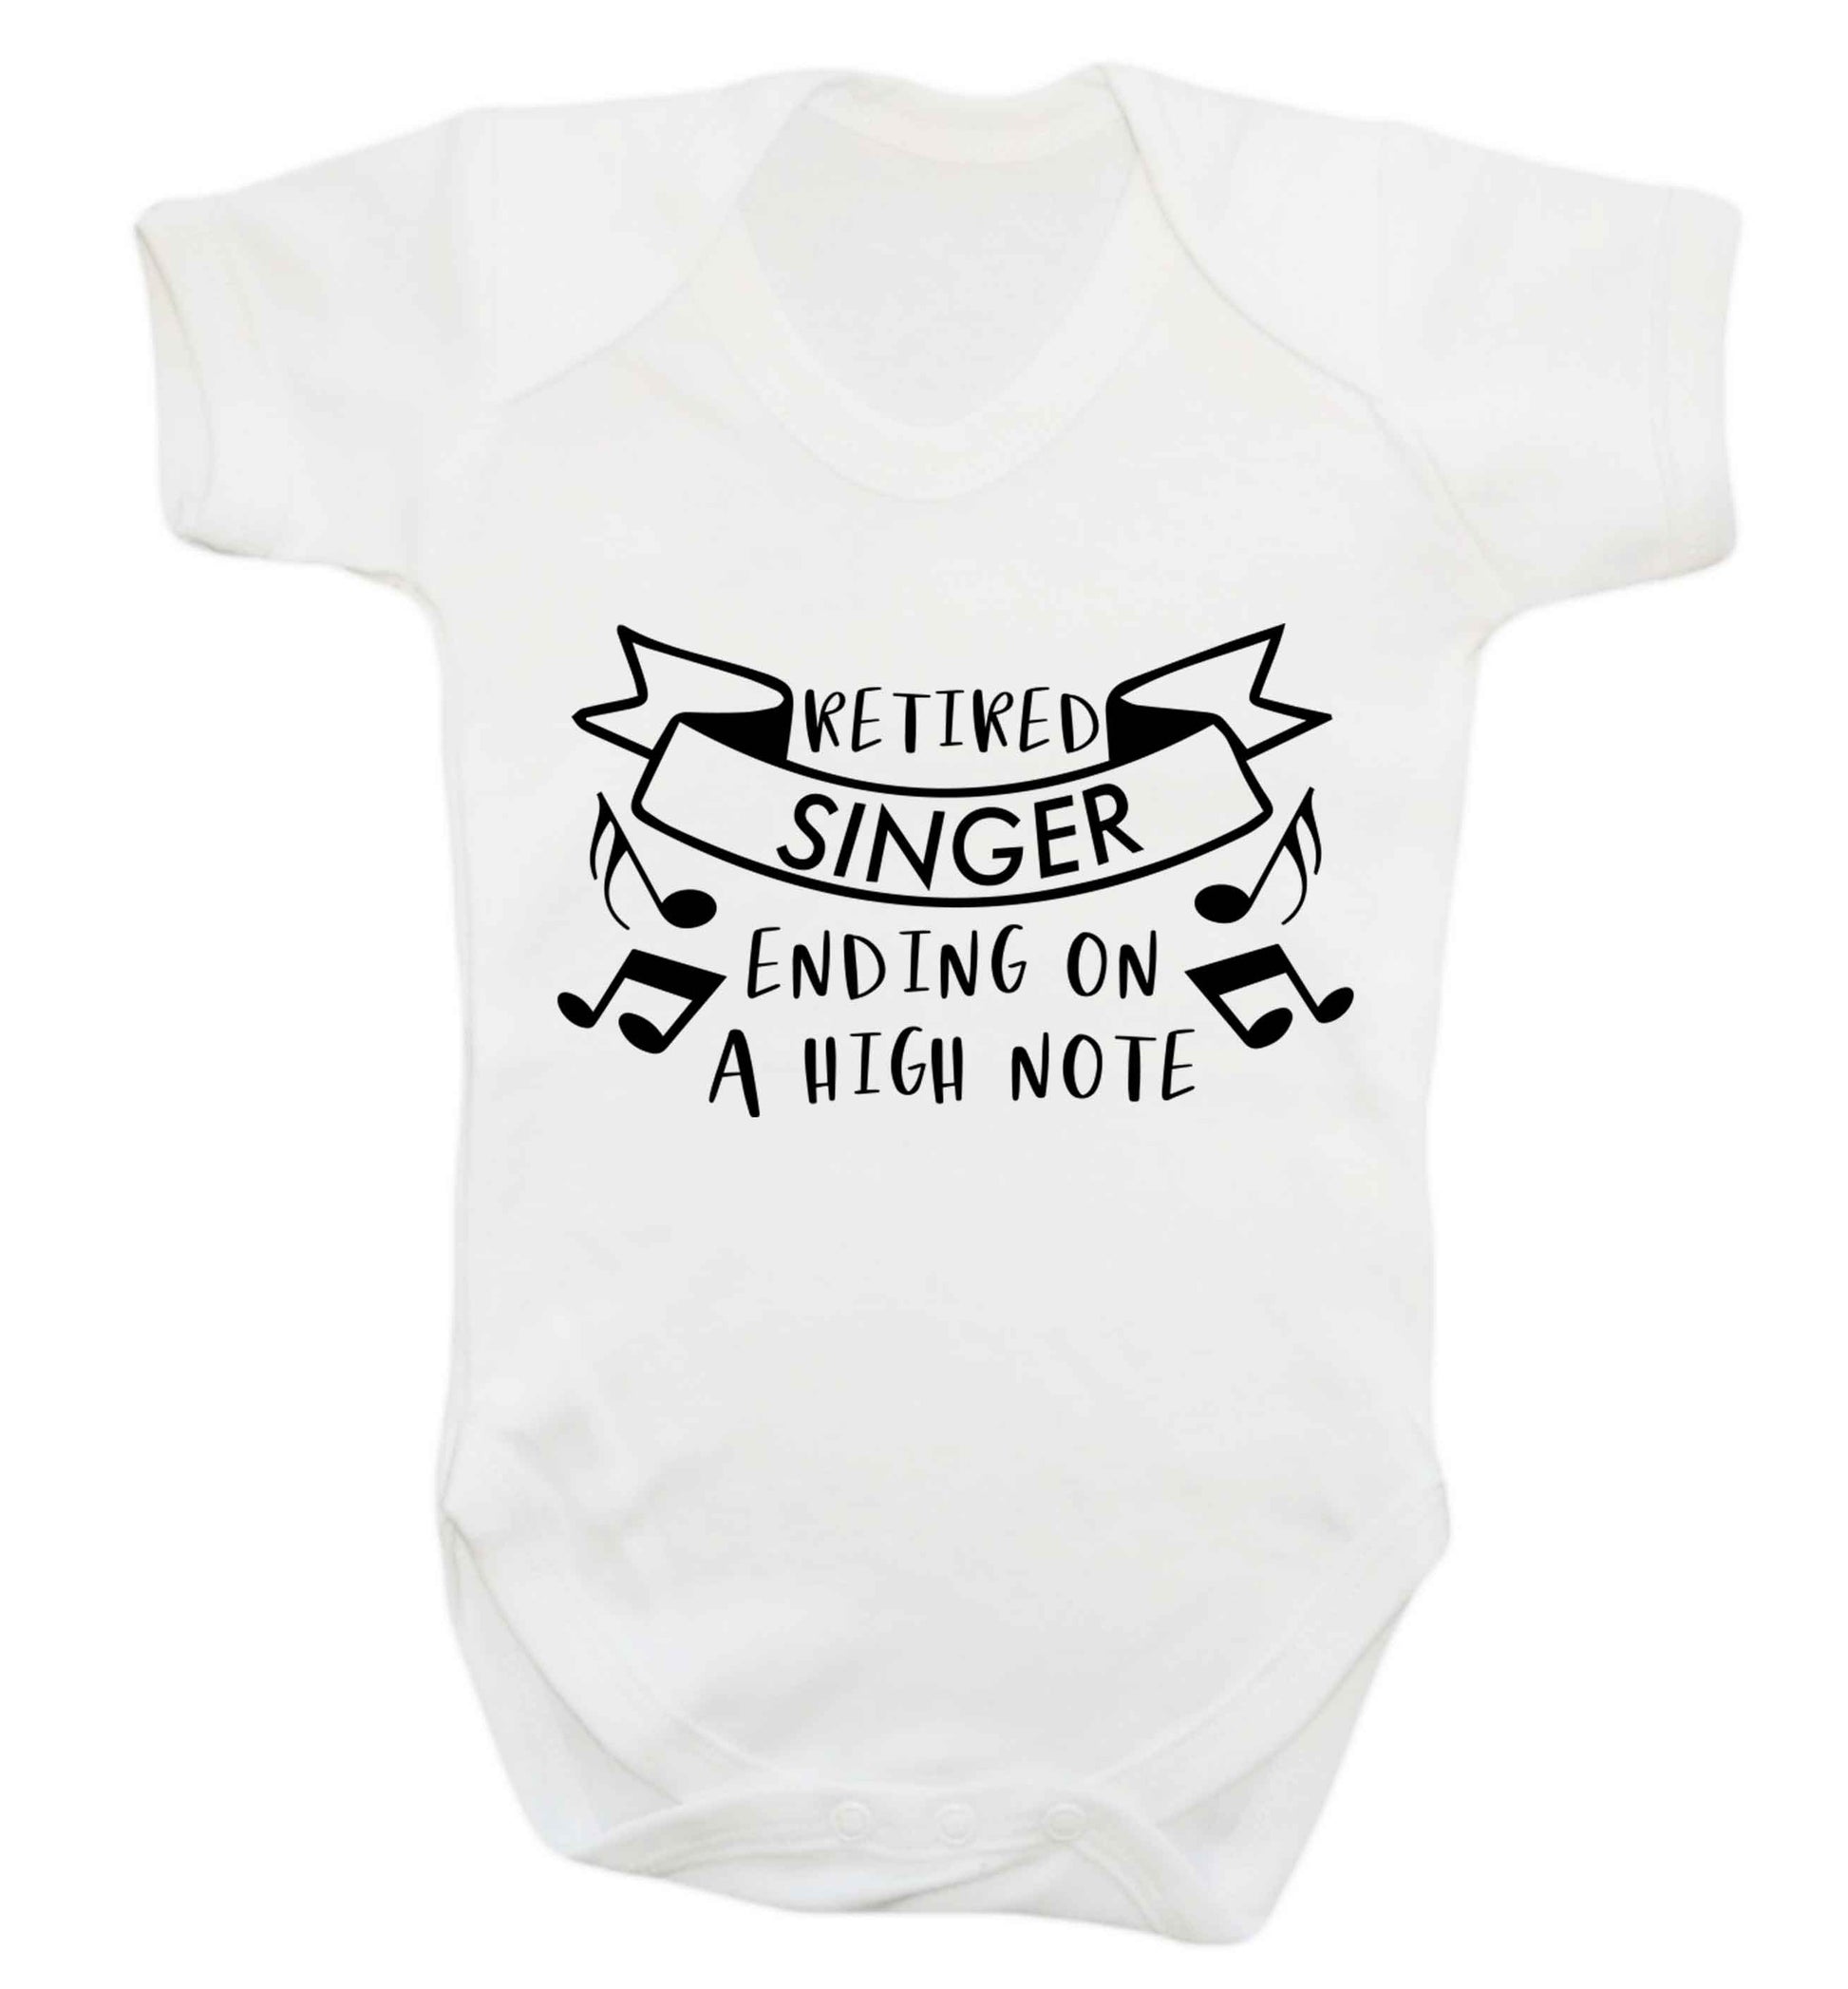 Retired singer ending on a high note Baby Vest white 18-24 months